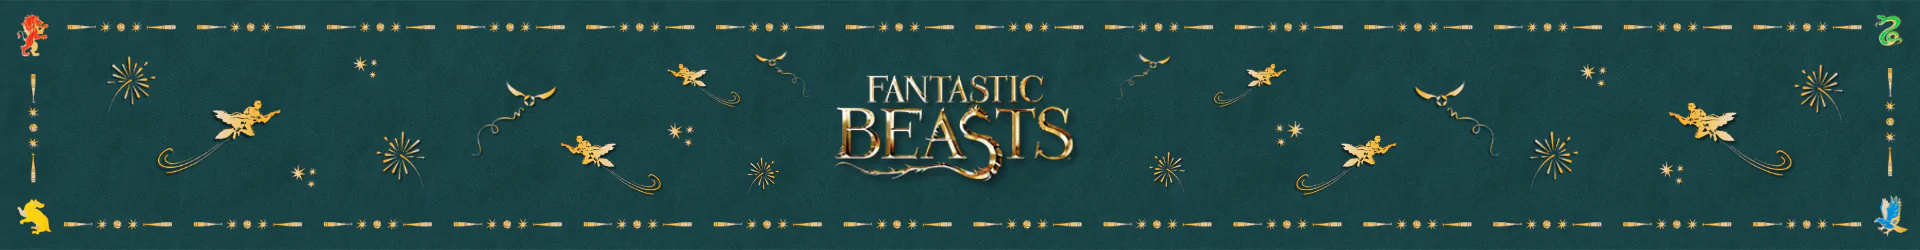 Fantastic Beasts and Where to Find Them plushes banner